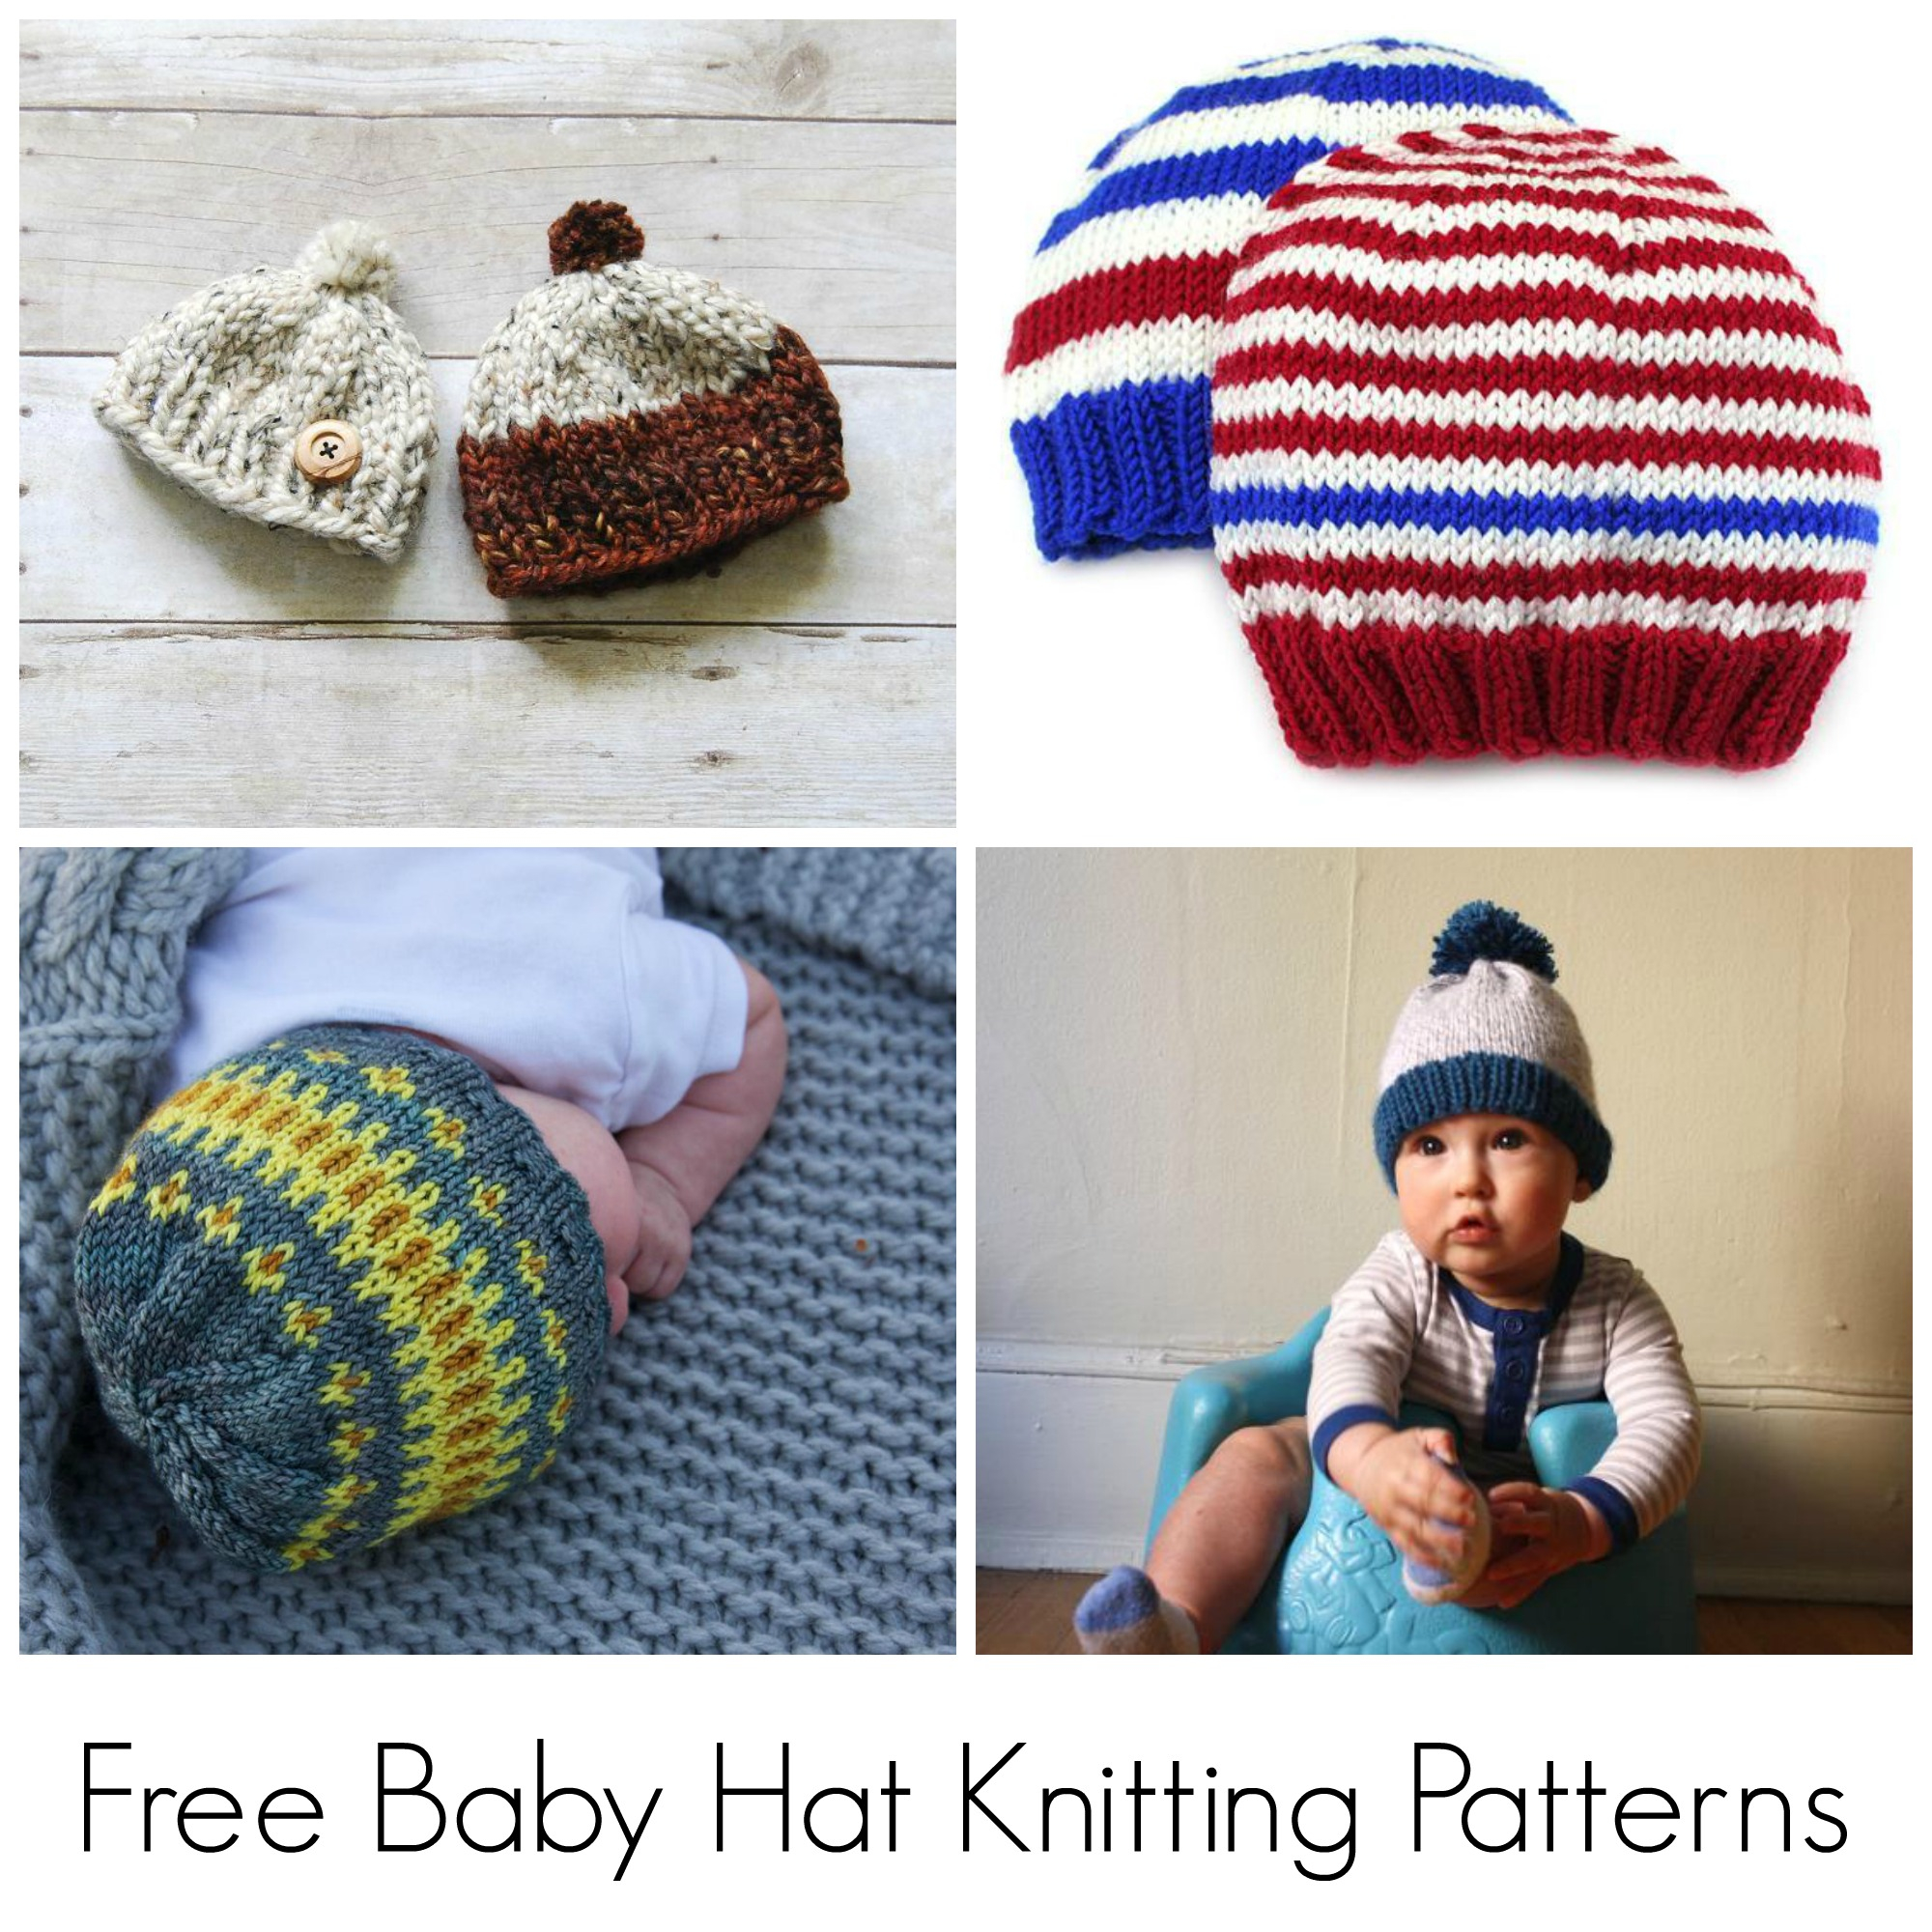 Bobble Hat Knitting Pattern Free 10 Free Knitting Patterns For Ba Hats On Craftsy